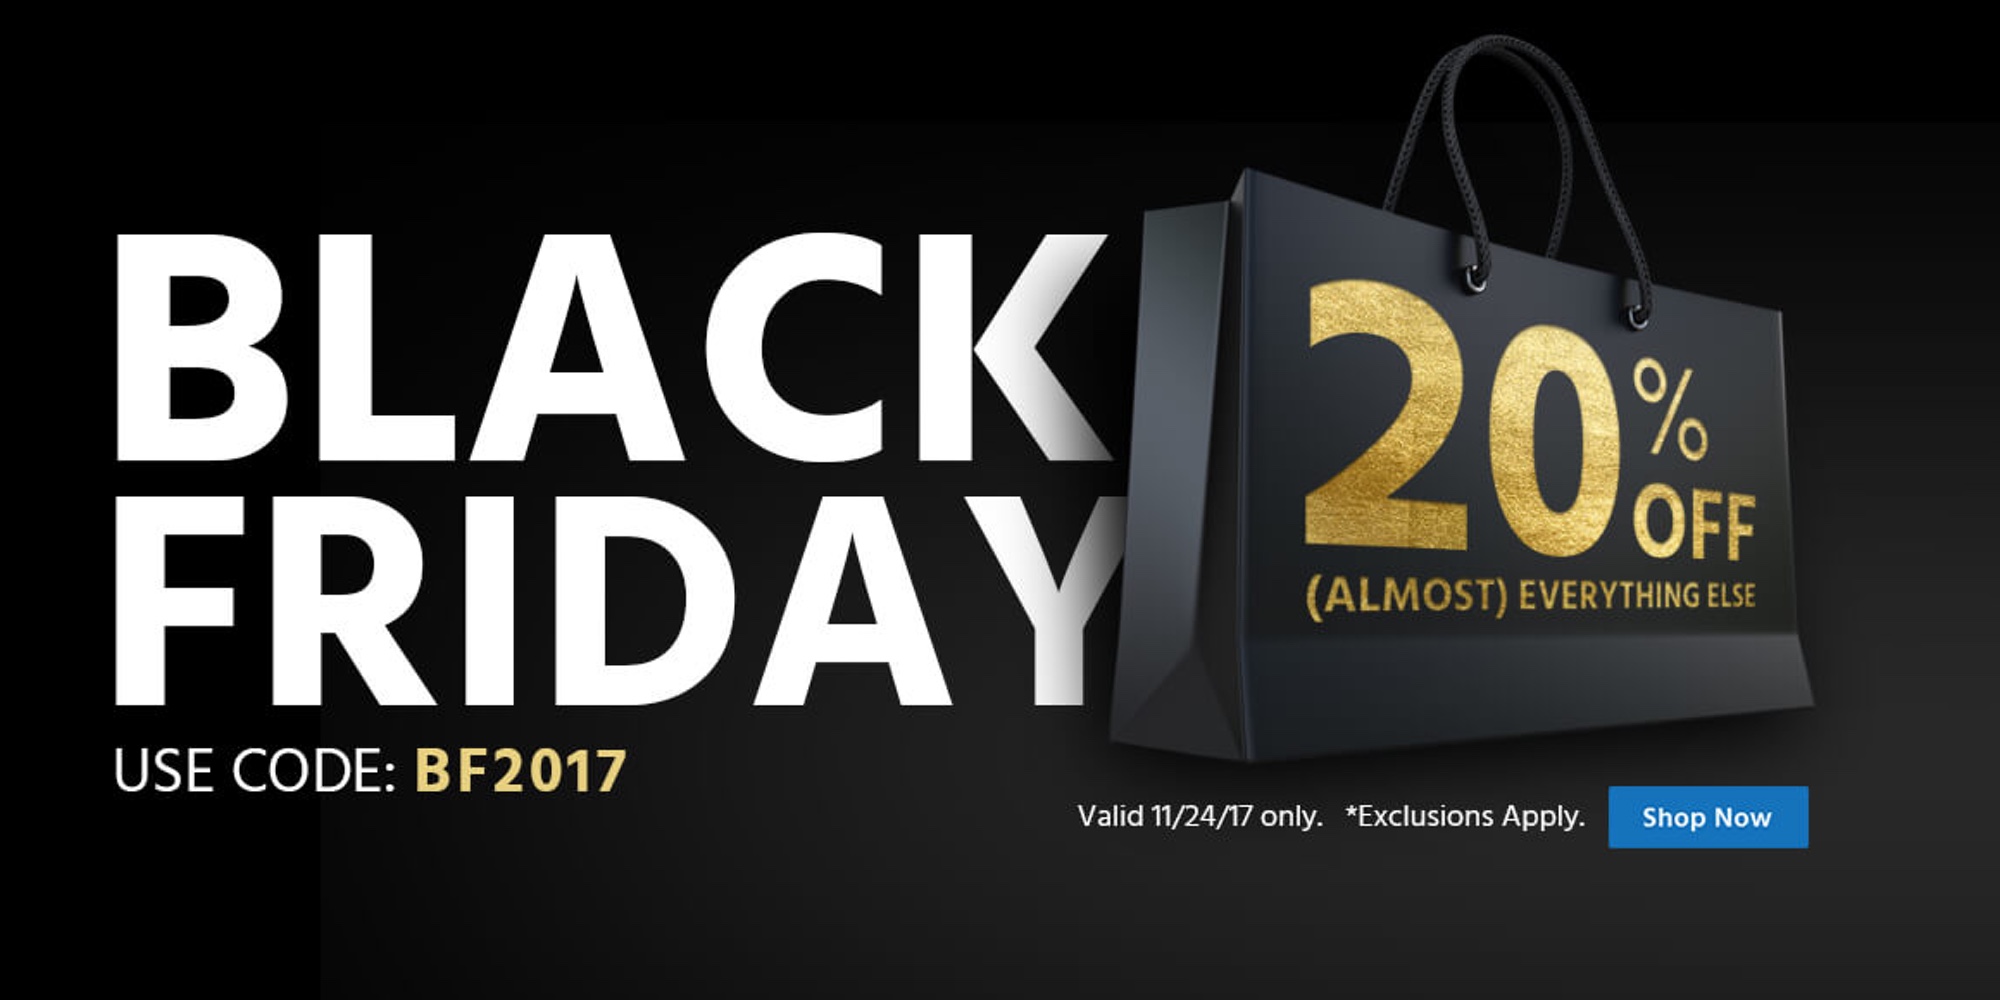 Monoprice Black Friday coupon code takes 20% off sitewide: cables, headphon...